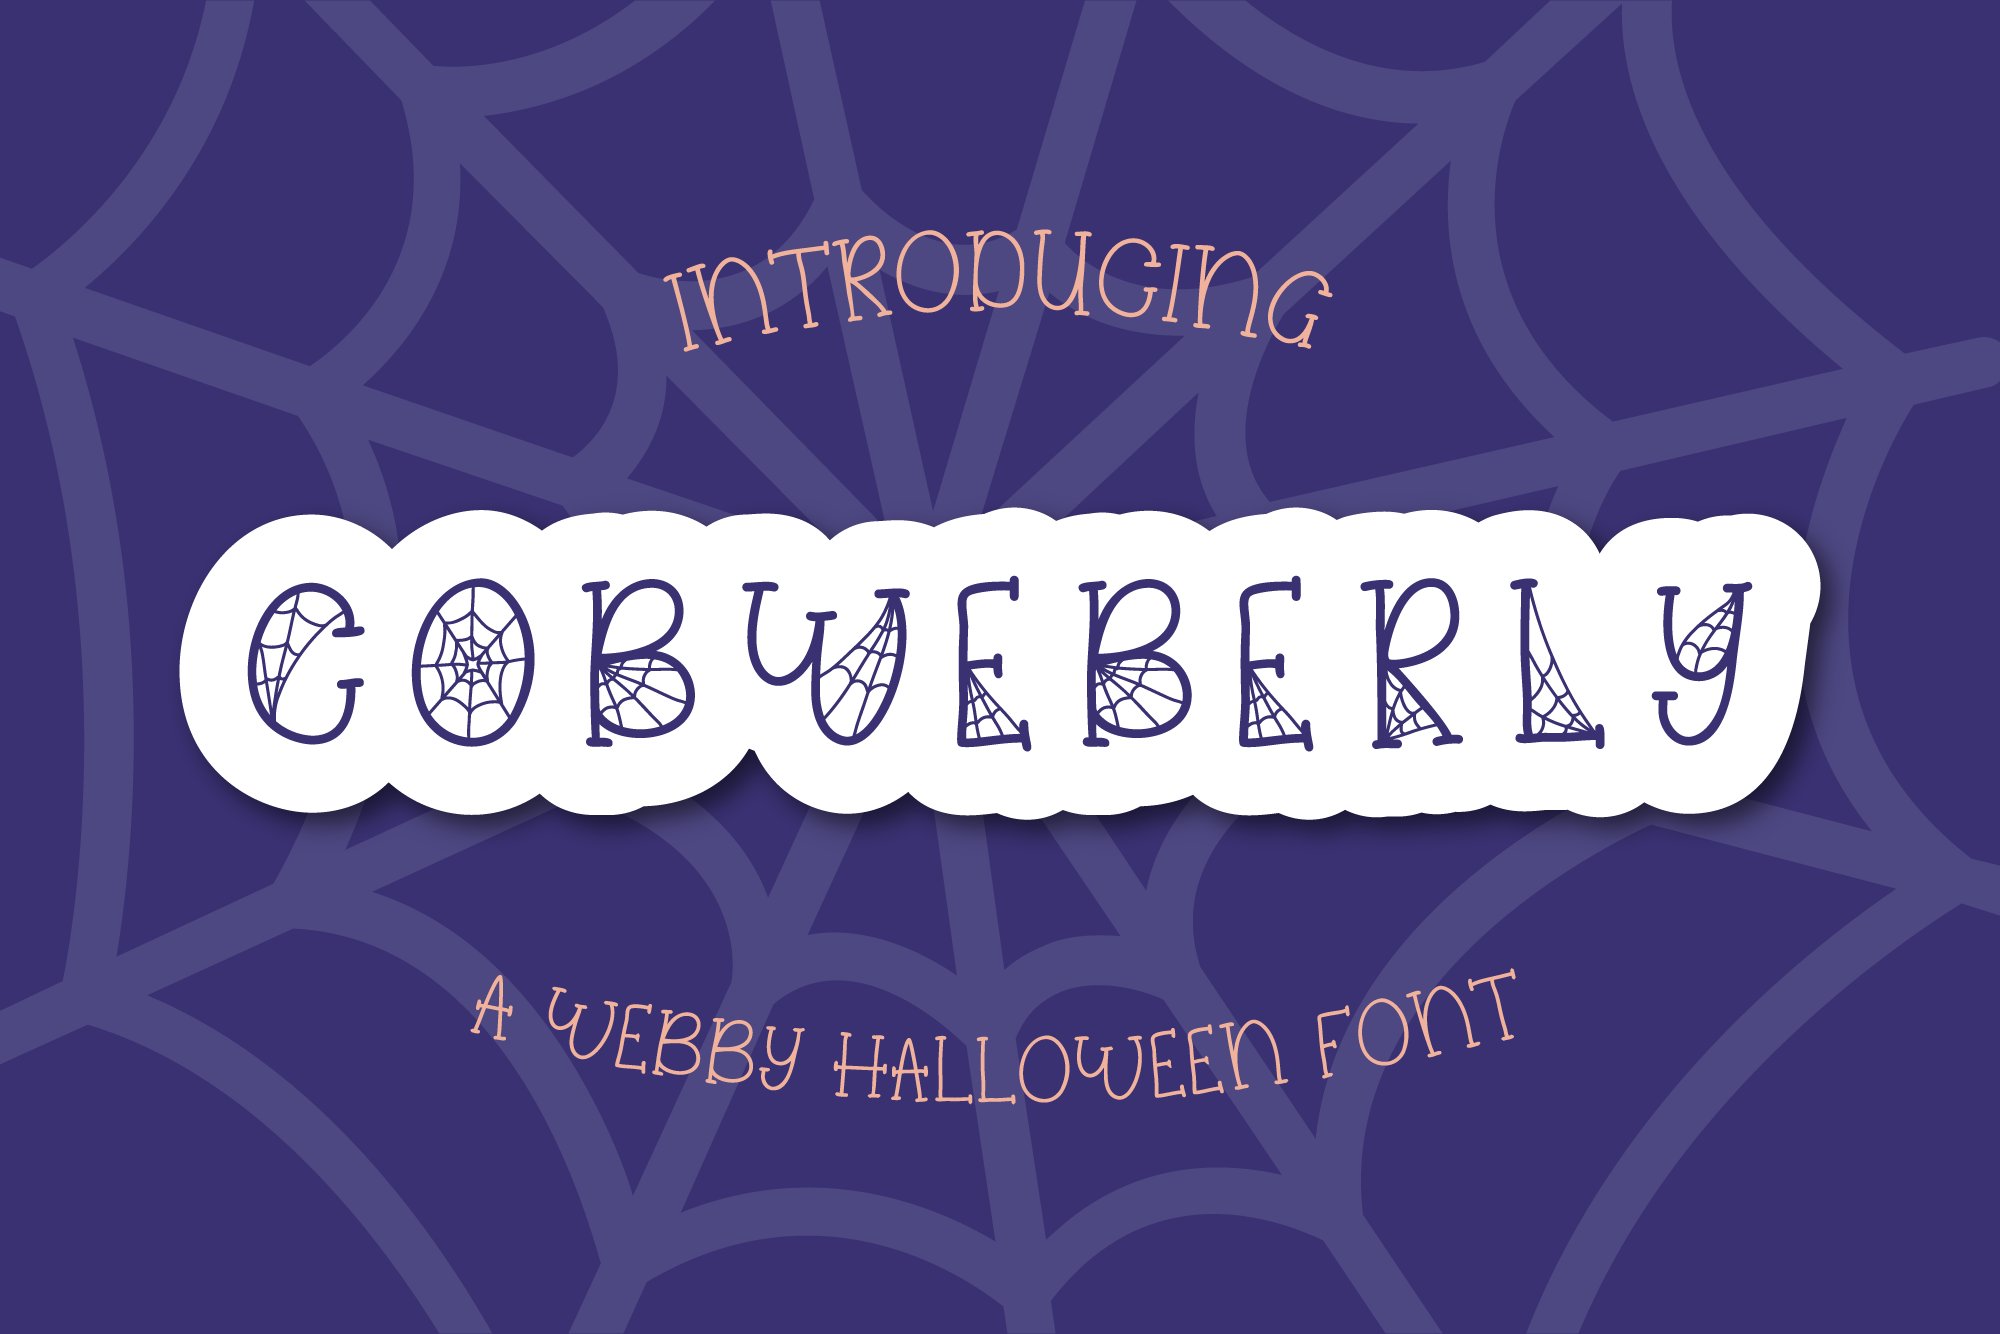 Cobweberly Halloween Spider Web Font cover image.